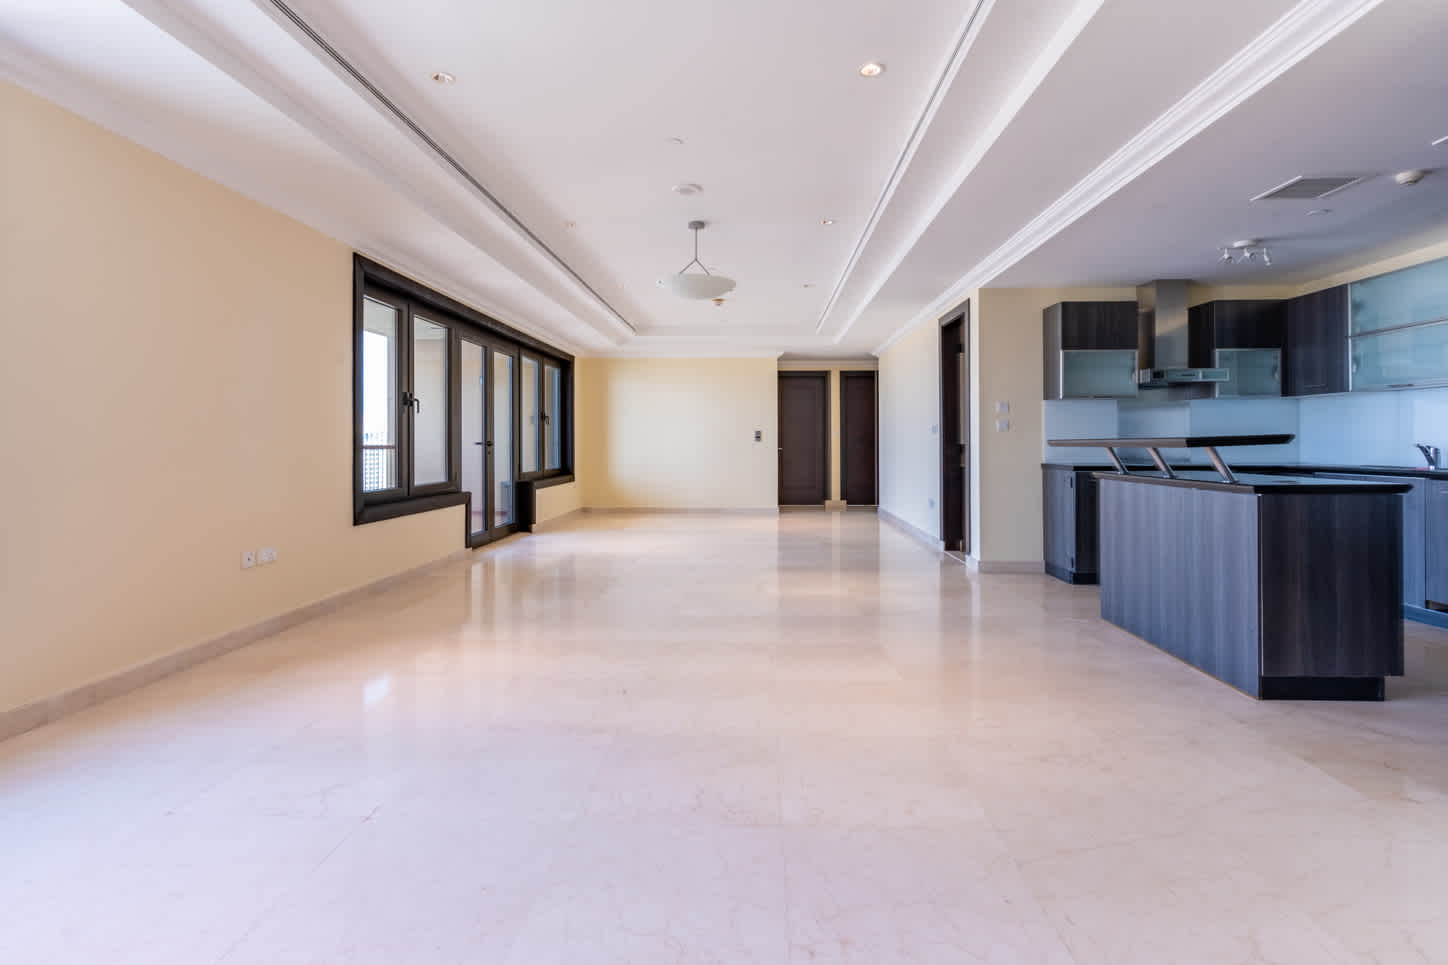 25 Spaces Real Estate - Porto Arabia - Apartment for Sale - 4th of July ( REF APT25377 ) 1